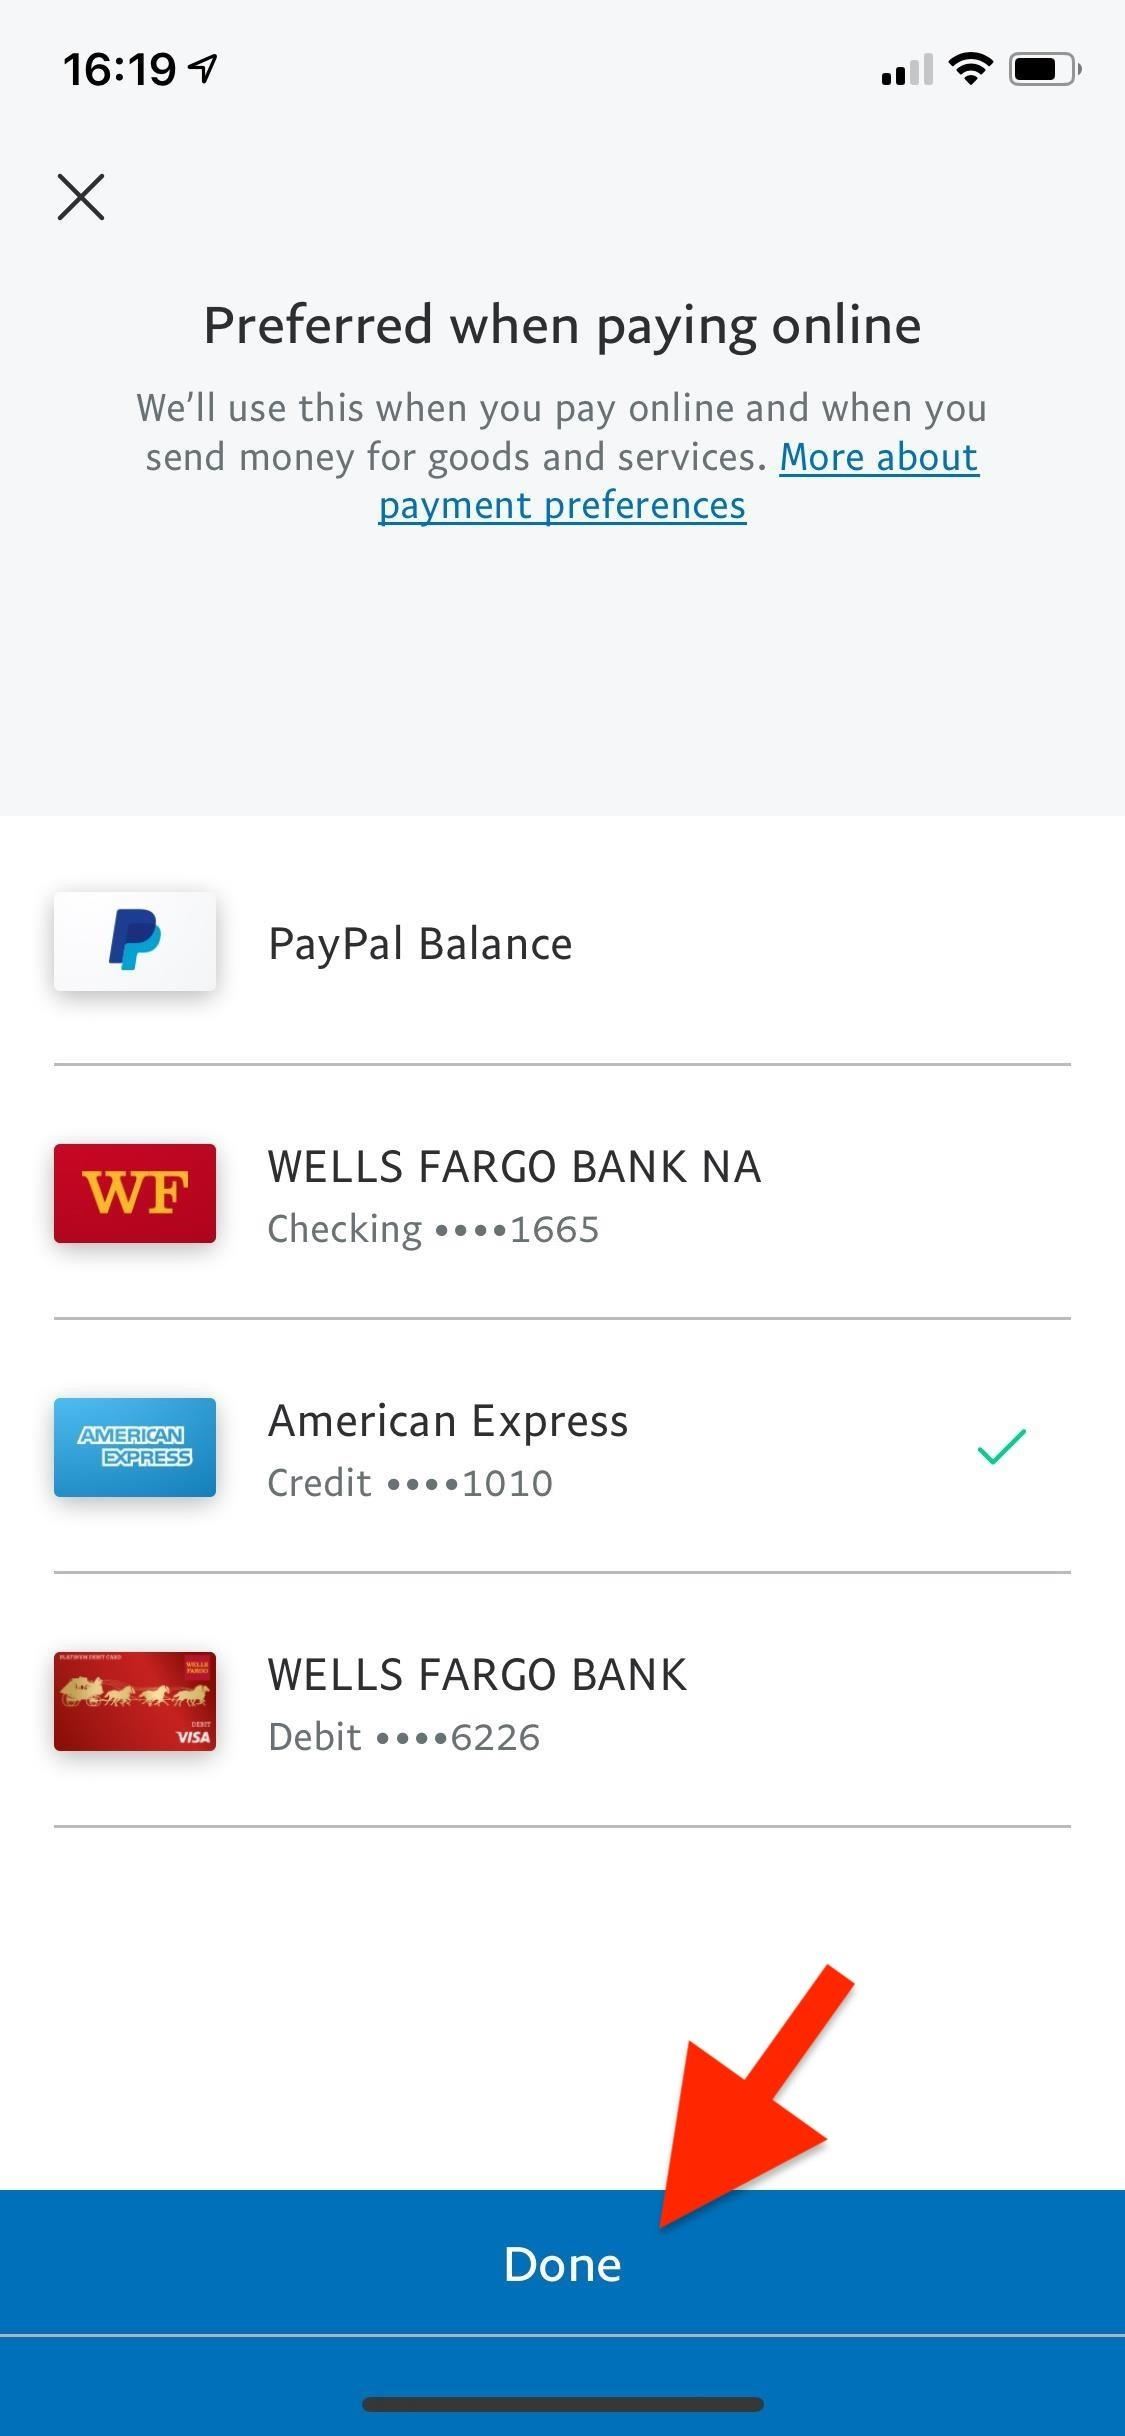 How to Change Online, In-Store, Google Pay, Samsung Pay & PayPal Cash Card Payment Preferences for PayPal